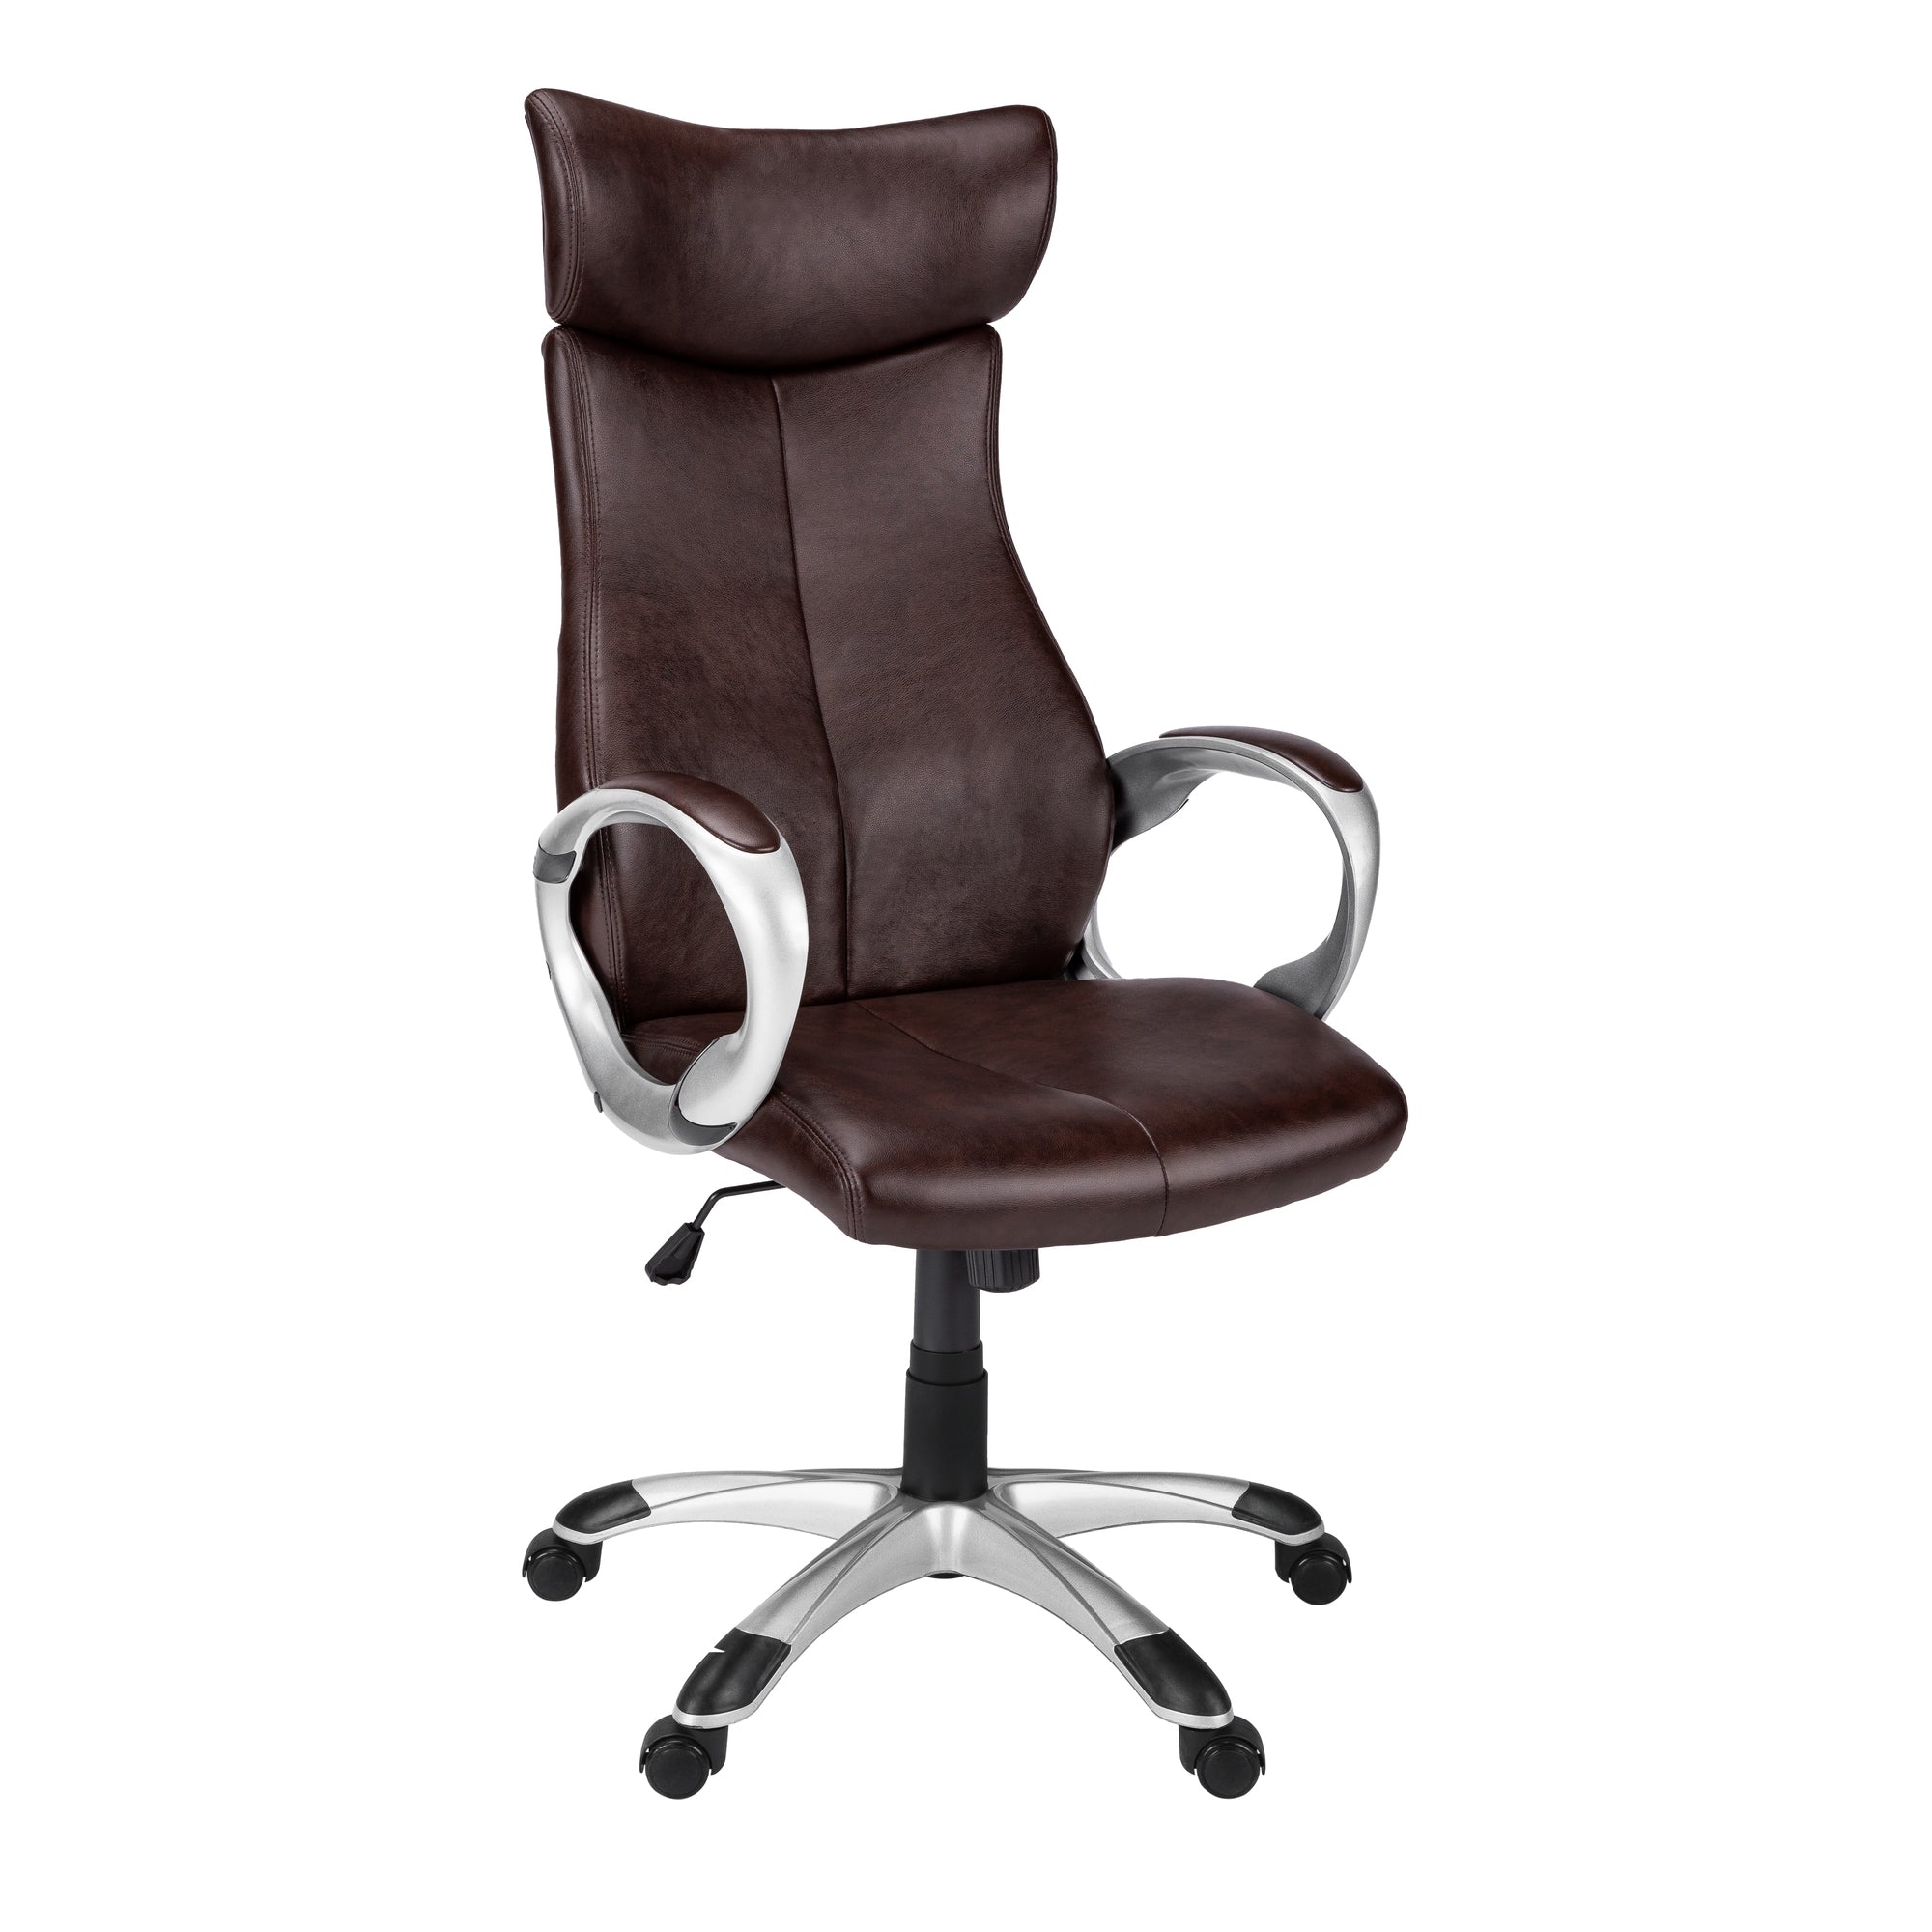 Office Chair - Brown Leather-Look / High Back Executive